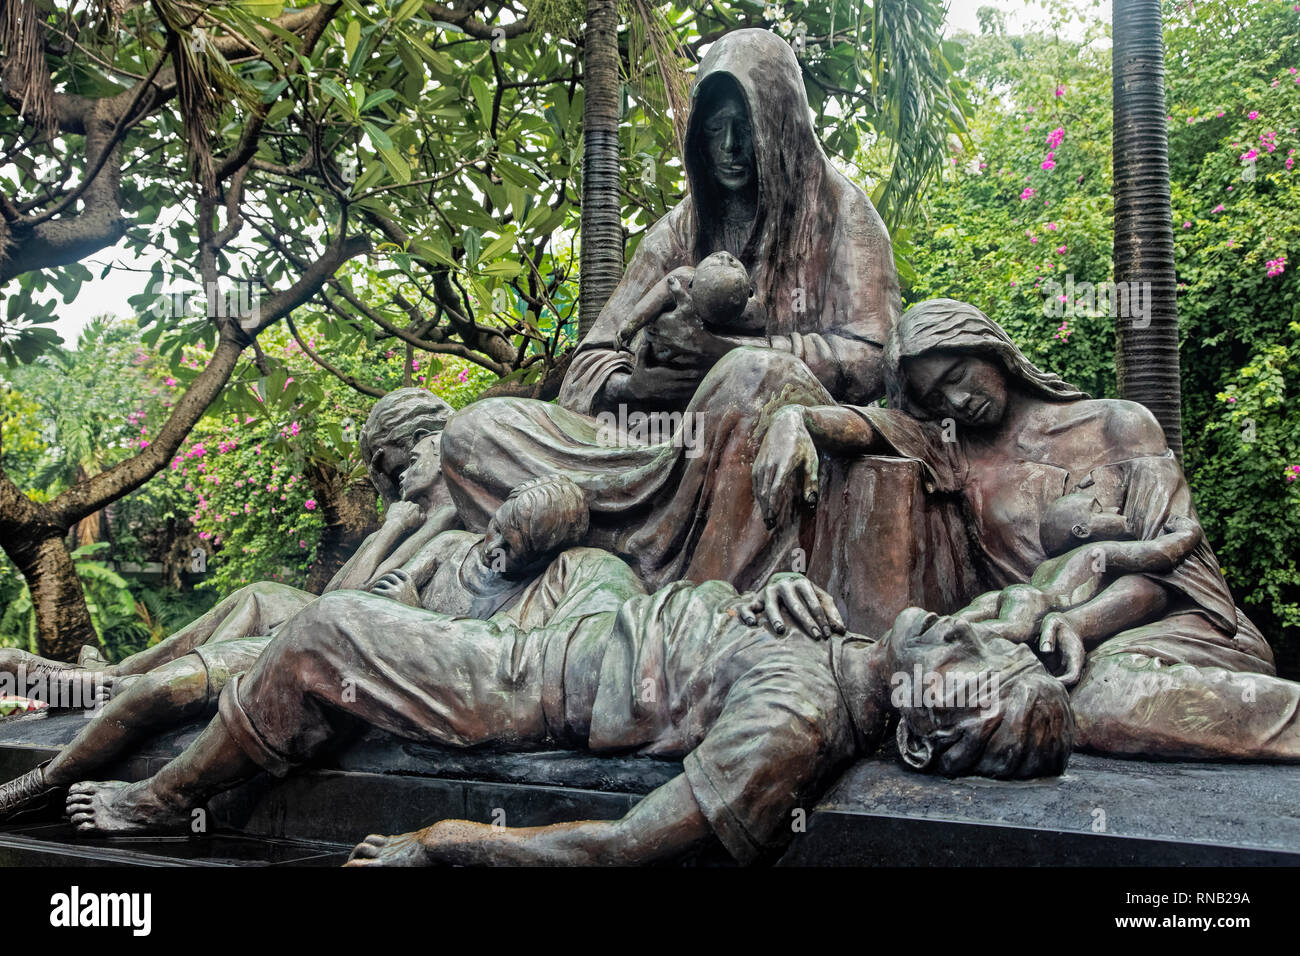 Memorare - Manila 1945 memorial dedicated to all the innocent lives lost during the Battle of Liberation WW2 Intramuros, Manila, Philippines Stock Photo